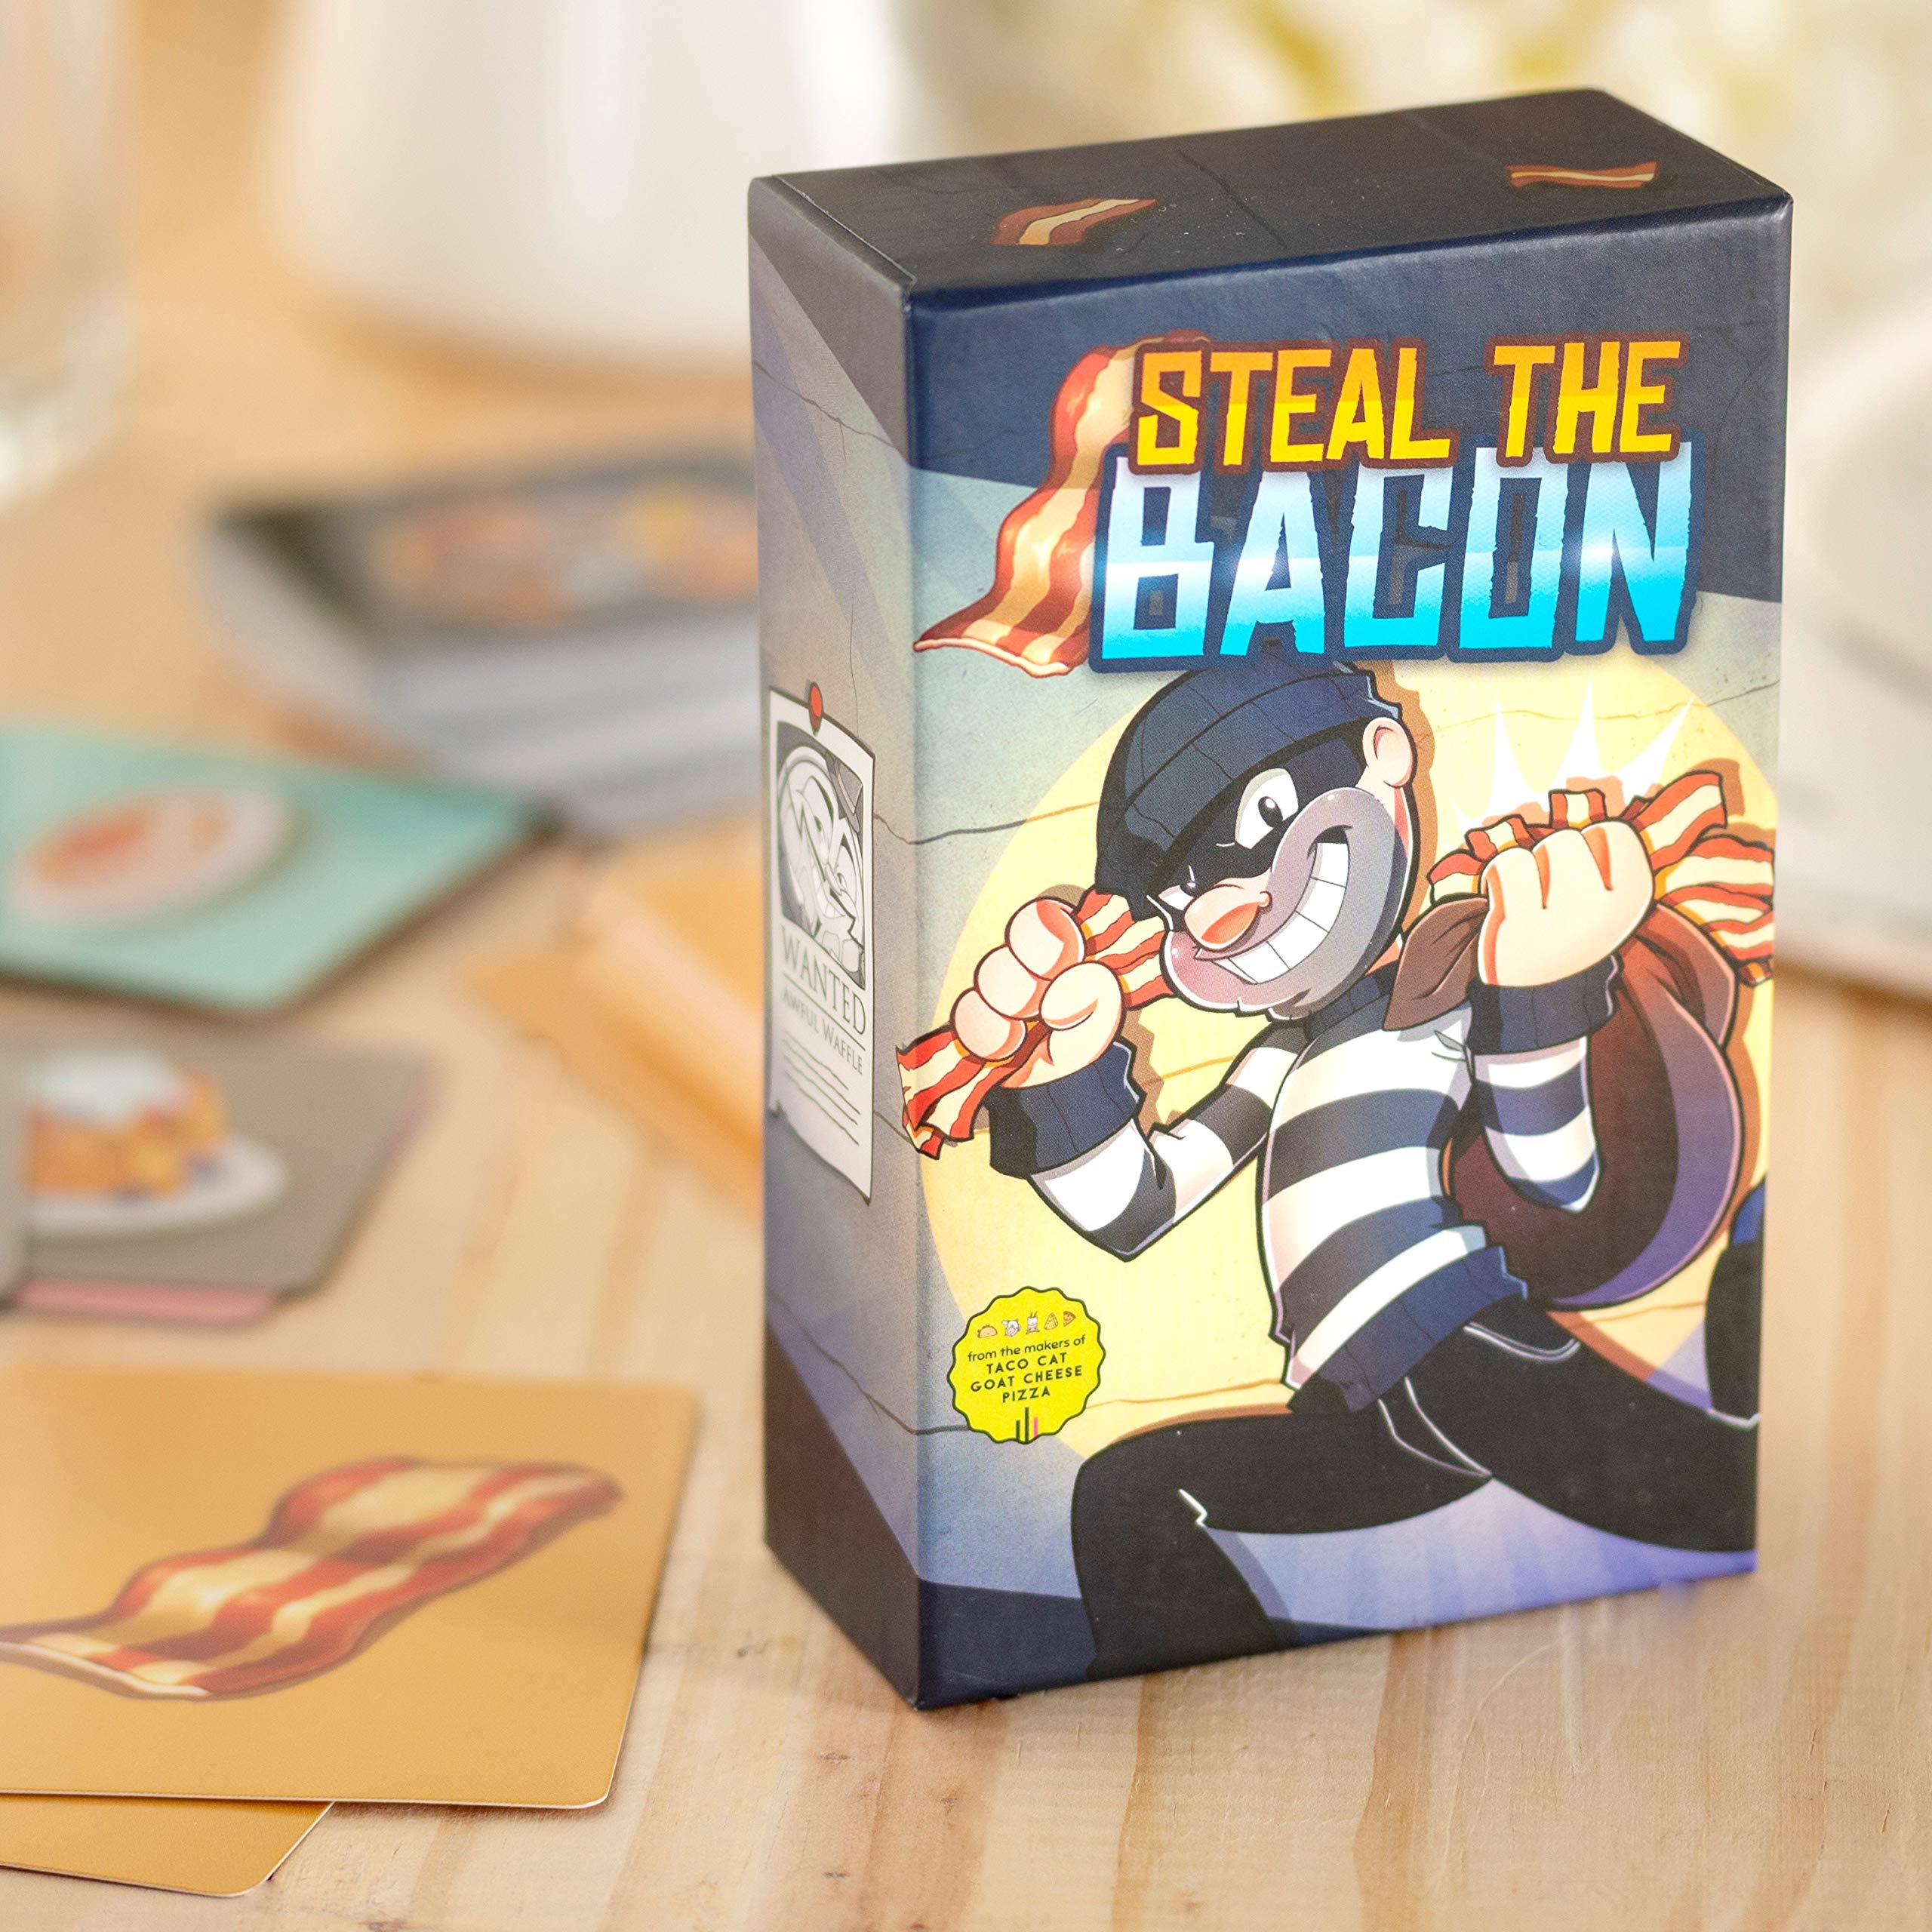 Steal The Bacon by The Creators of Taco Cat Goat Cheese Pizza, Family Party Game, Ages 8+, 1 Minute to Learn, and Ridiculously Fun to Play!